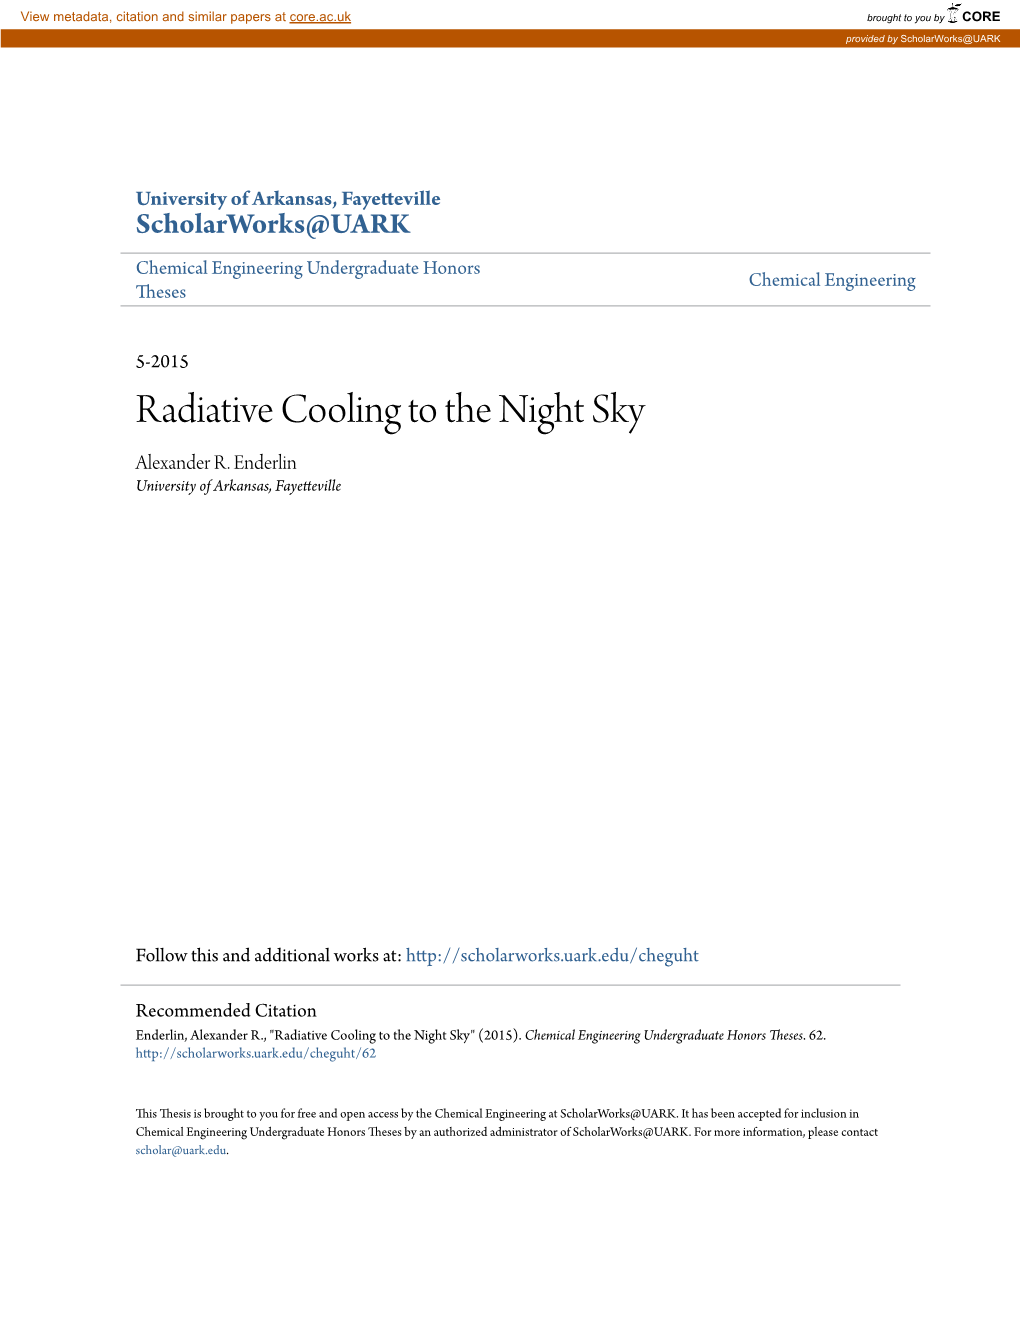 Radiative Cooling to the Night Sky Alexander R